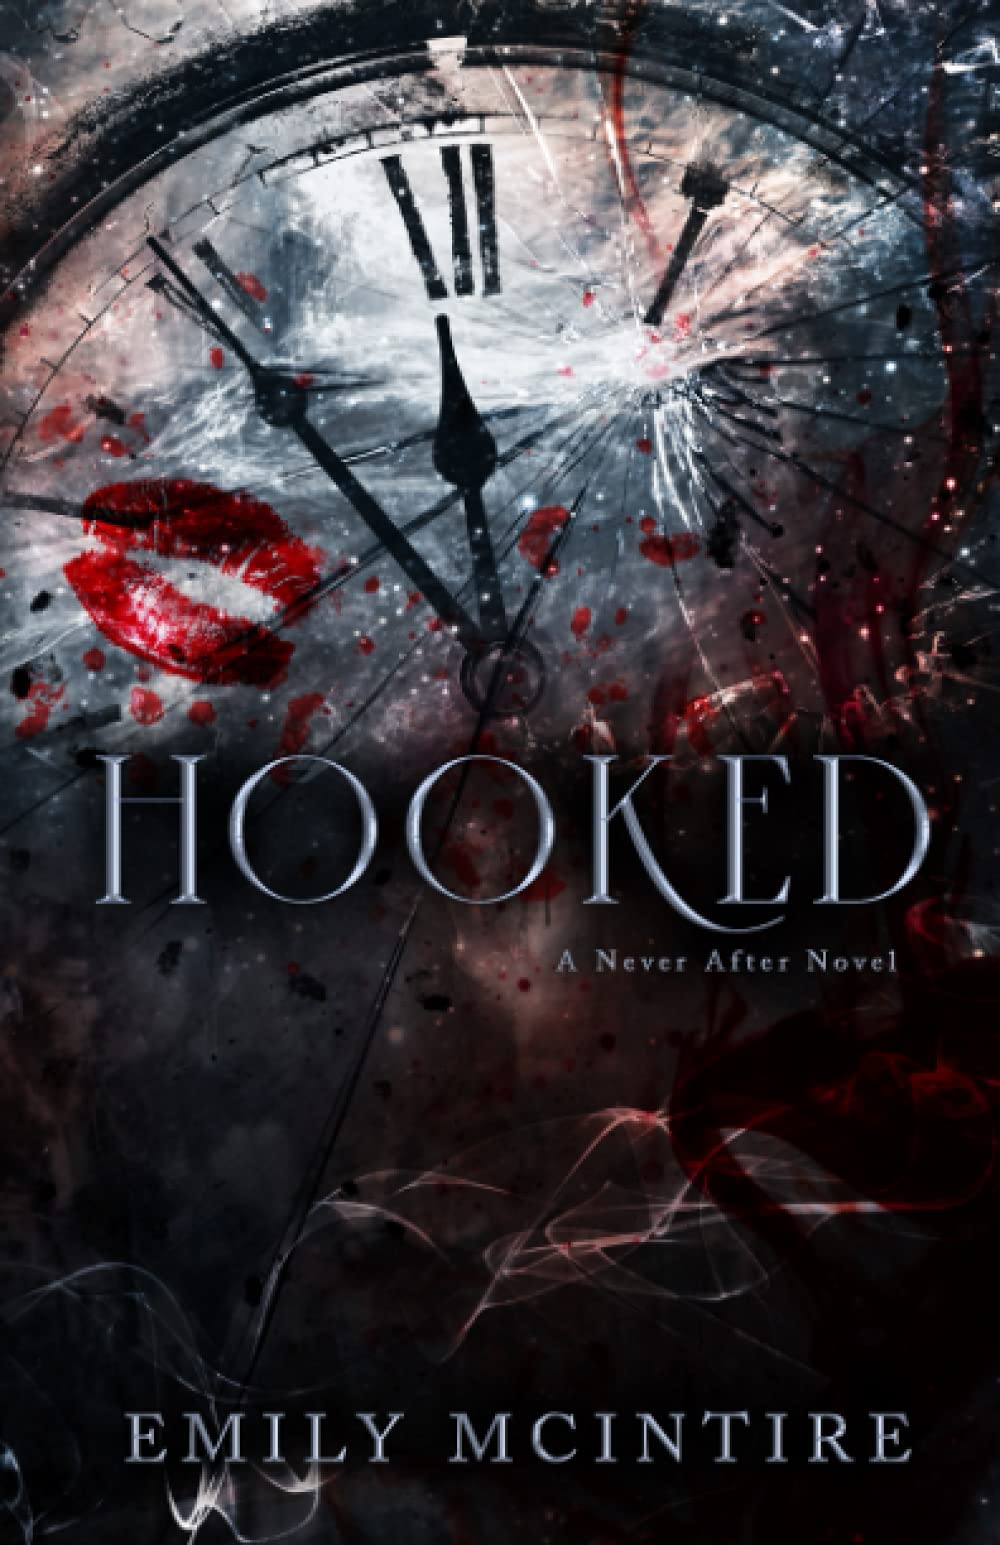 [EPUB] Never After #1 Hooked by Emily McIntire